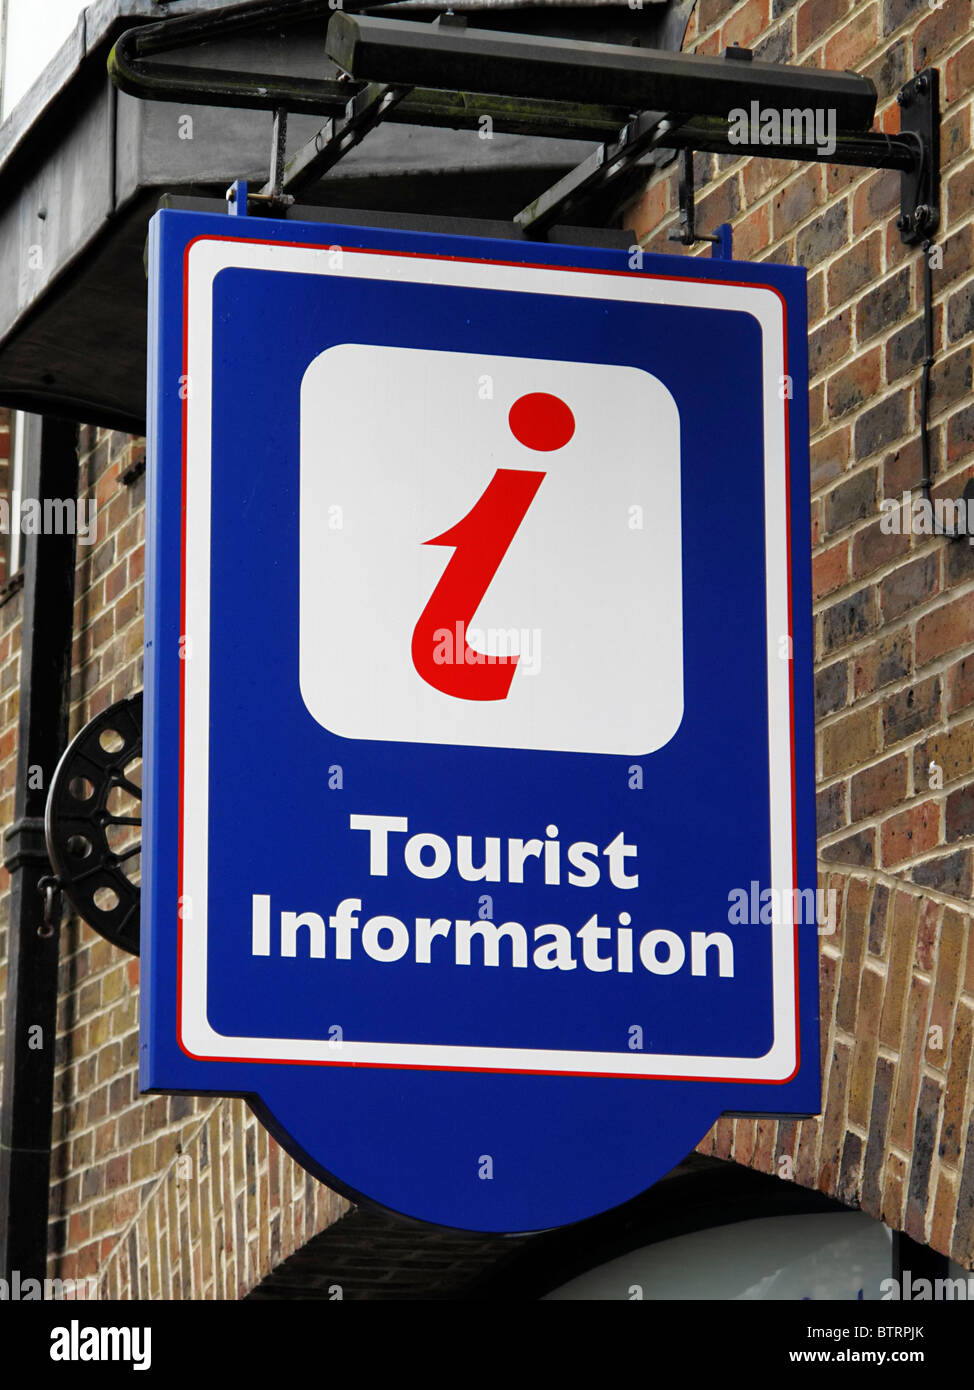 Hanging tourist information sign Stock Photo